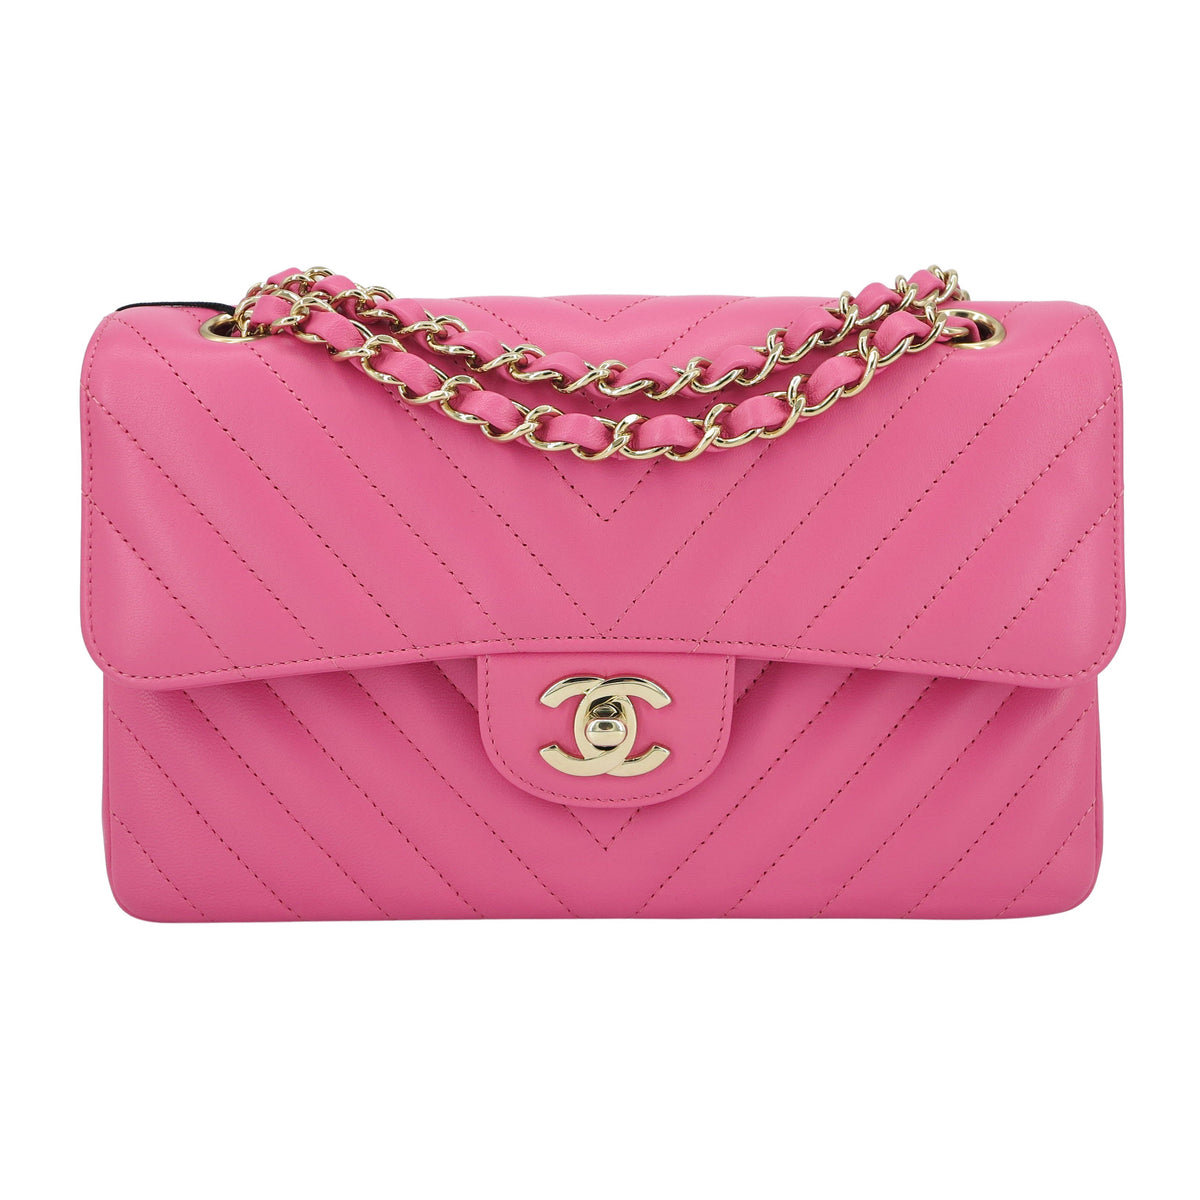 CHANEL Small Chevron Classic Double Flap Bag in 19C Barbie Pink | Dearluxe